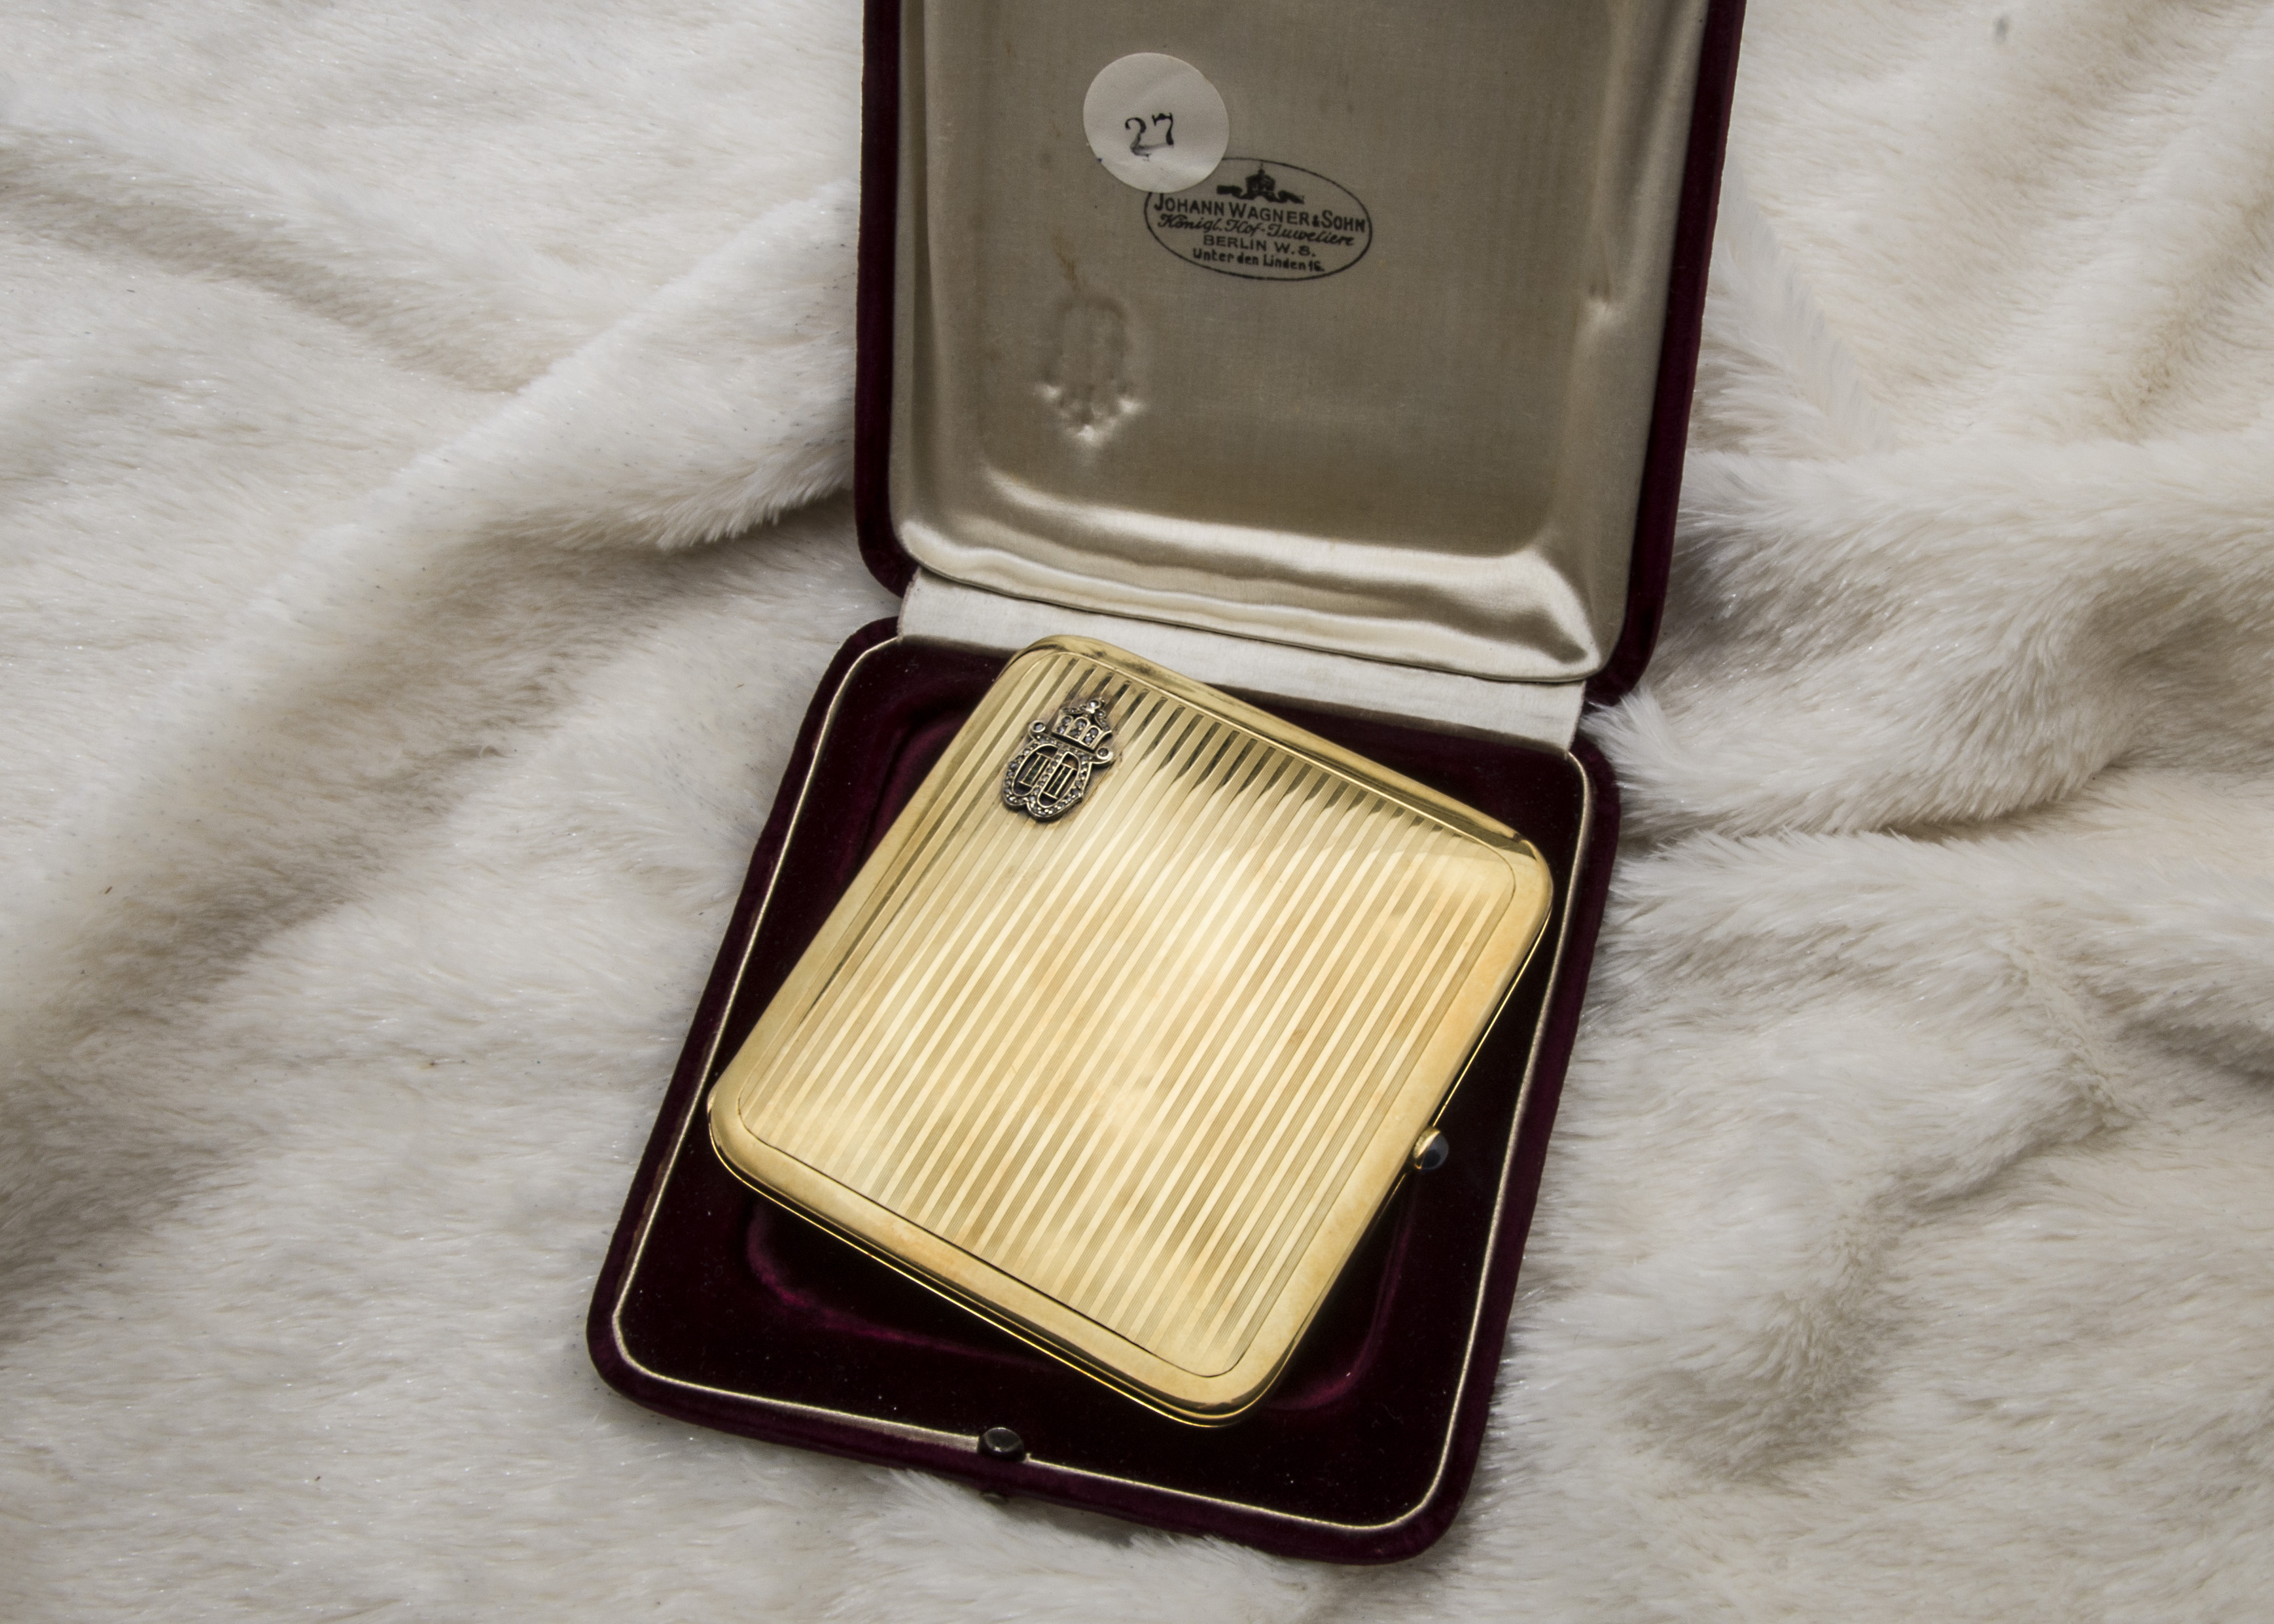 An interesting and fine early 20th century German gold cigarette case from Johann Wagner & Sohn, the